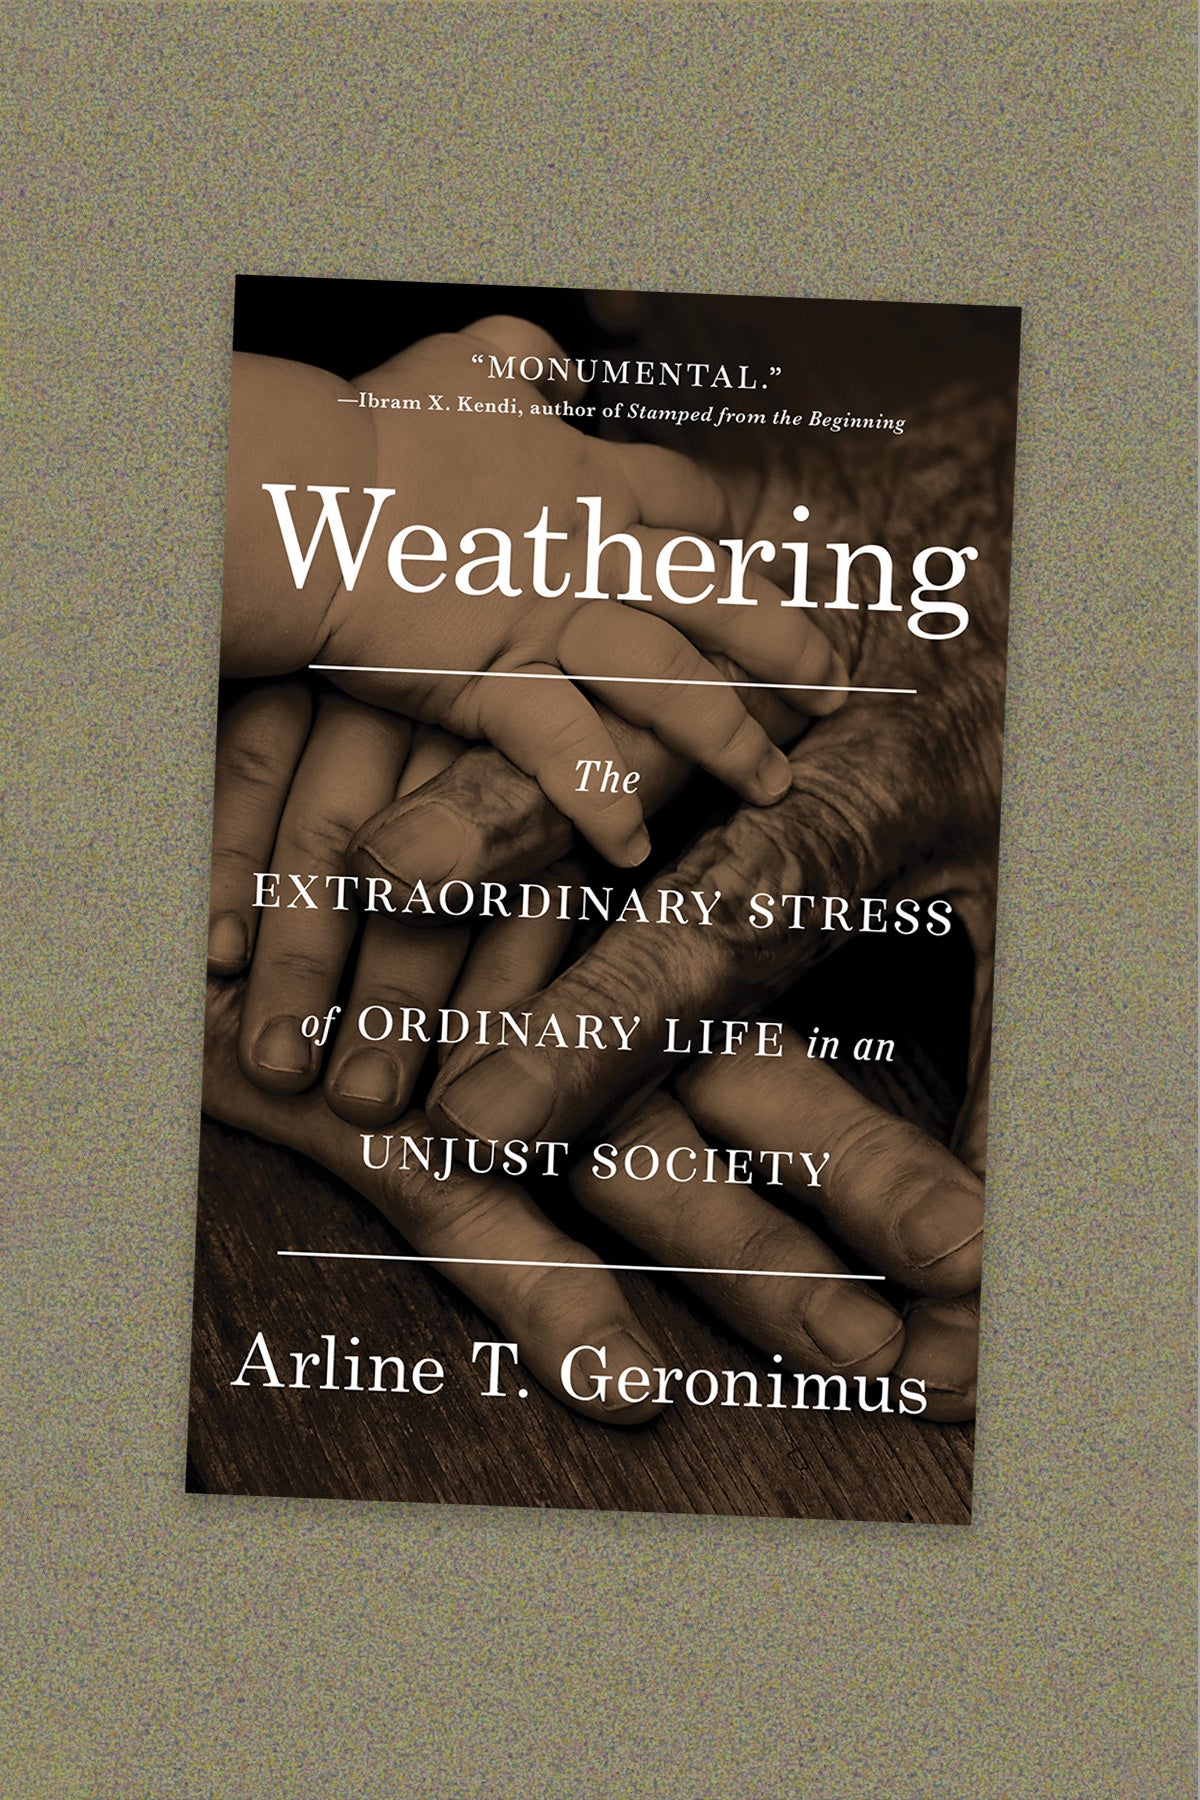 Book cover for “Weathering: The extraordinary stress of ordinary life in an unjust society” byt Arline T. Geronimus. The cover is a sepia-toned photo of a group of dark hands stacked on top of one another. The cover is on a brown and grey speckled background.